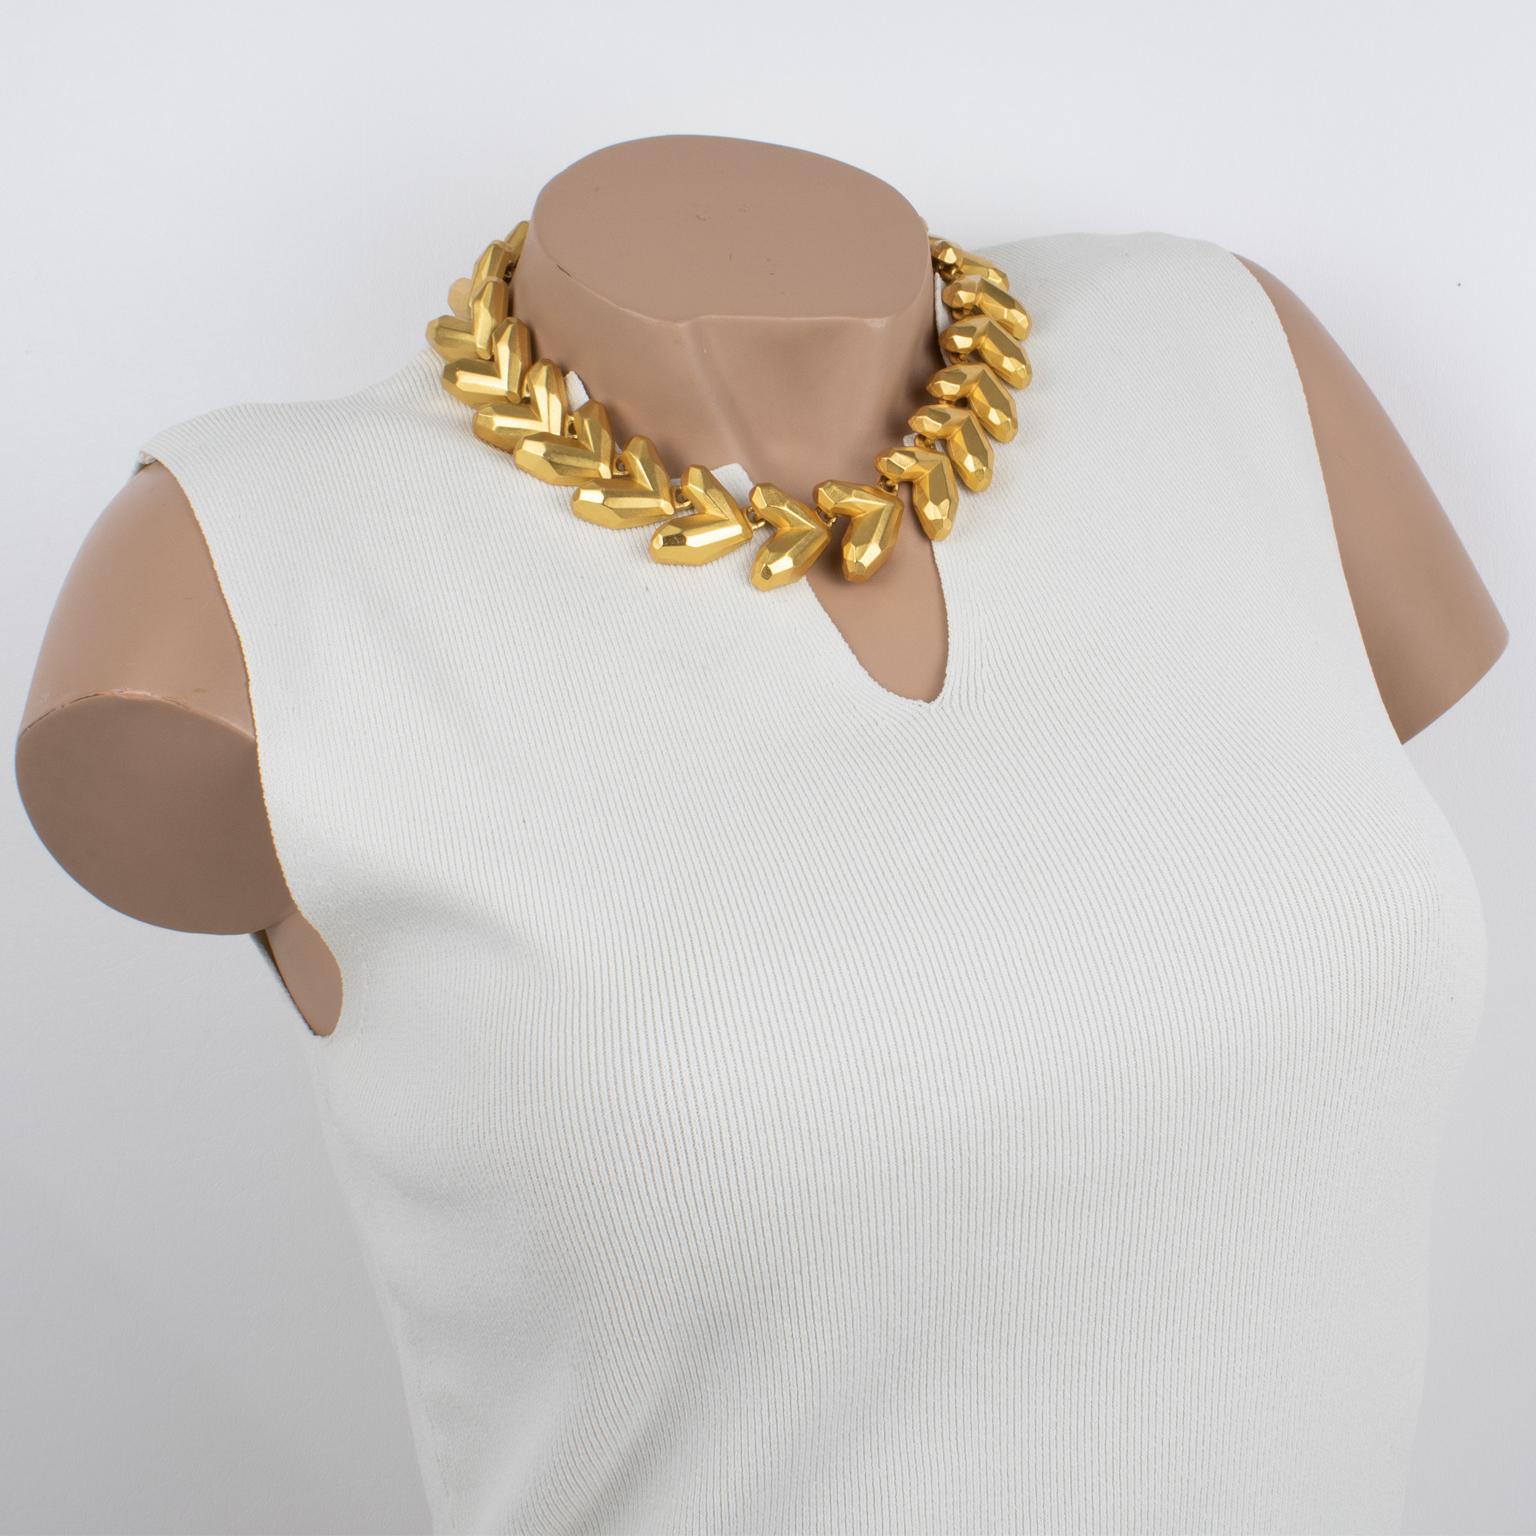 This gorgeous Kenzo Paris choker necklace features an around-the-neck geometric shape with gilt metal dimensional carving and satin finish textured aspect. The brand tag 